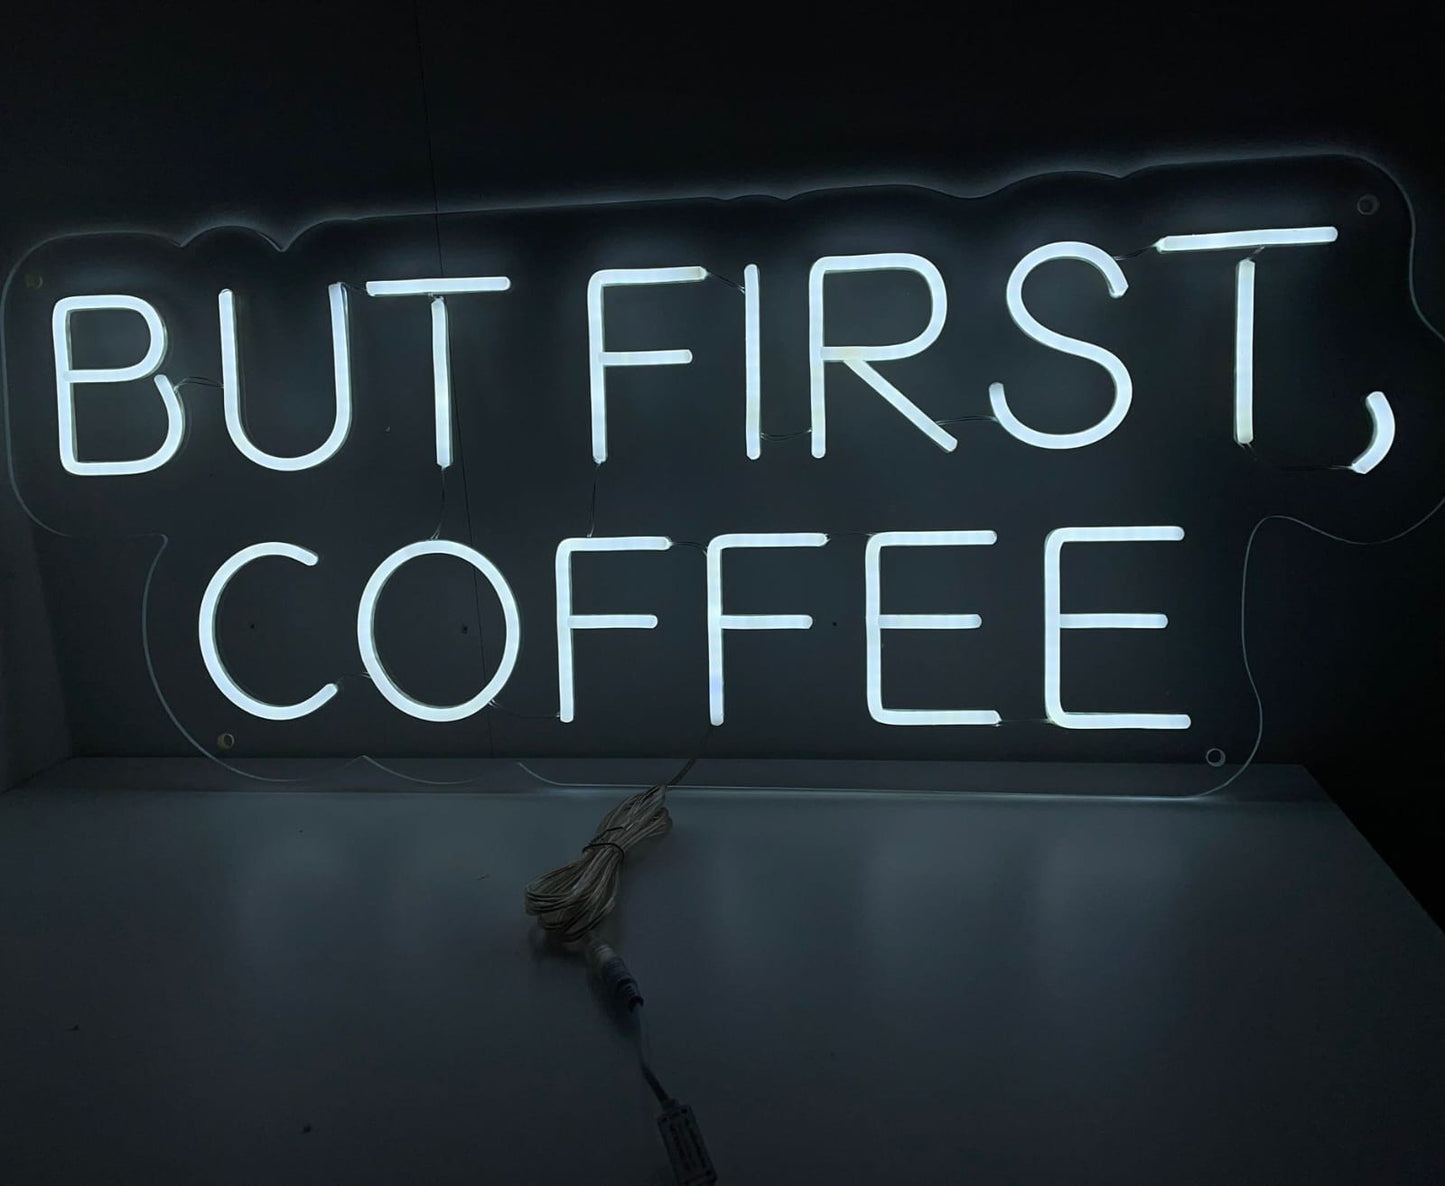 But First, Coffee Neon tabela